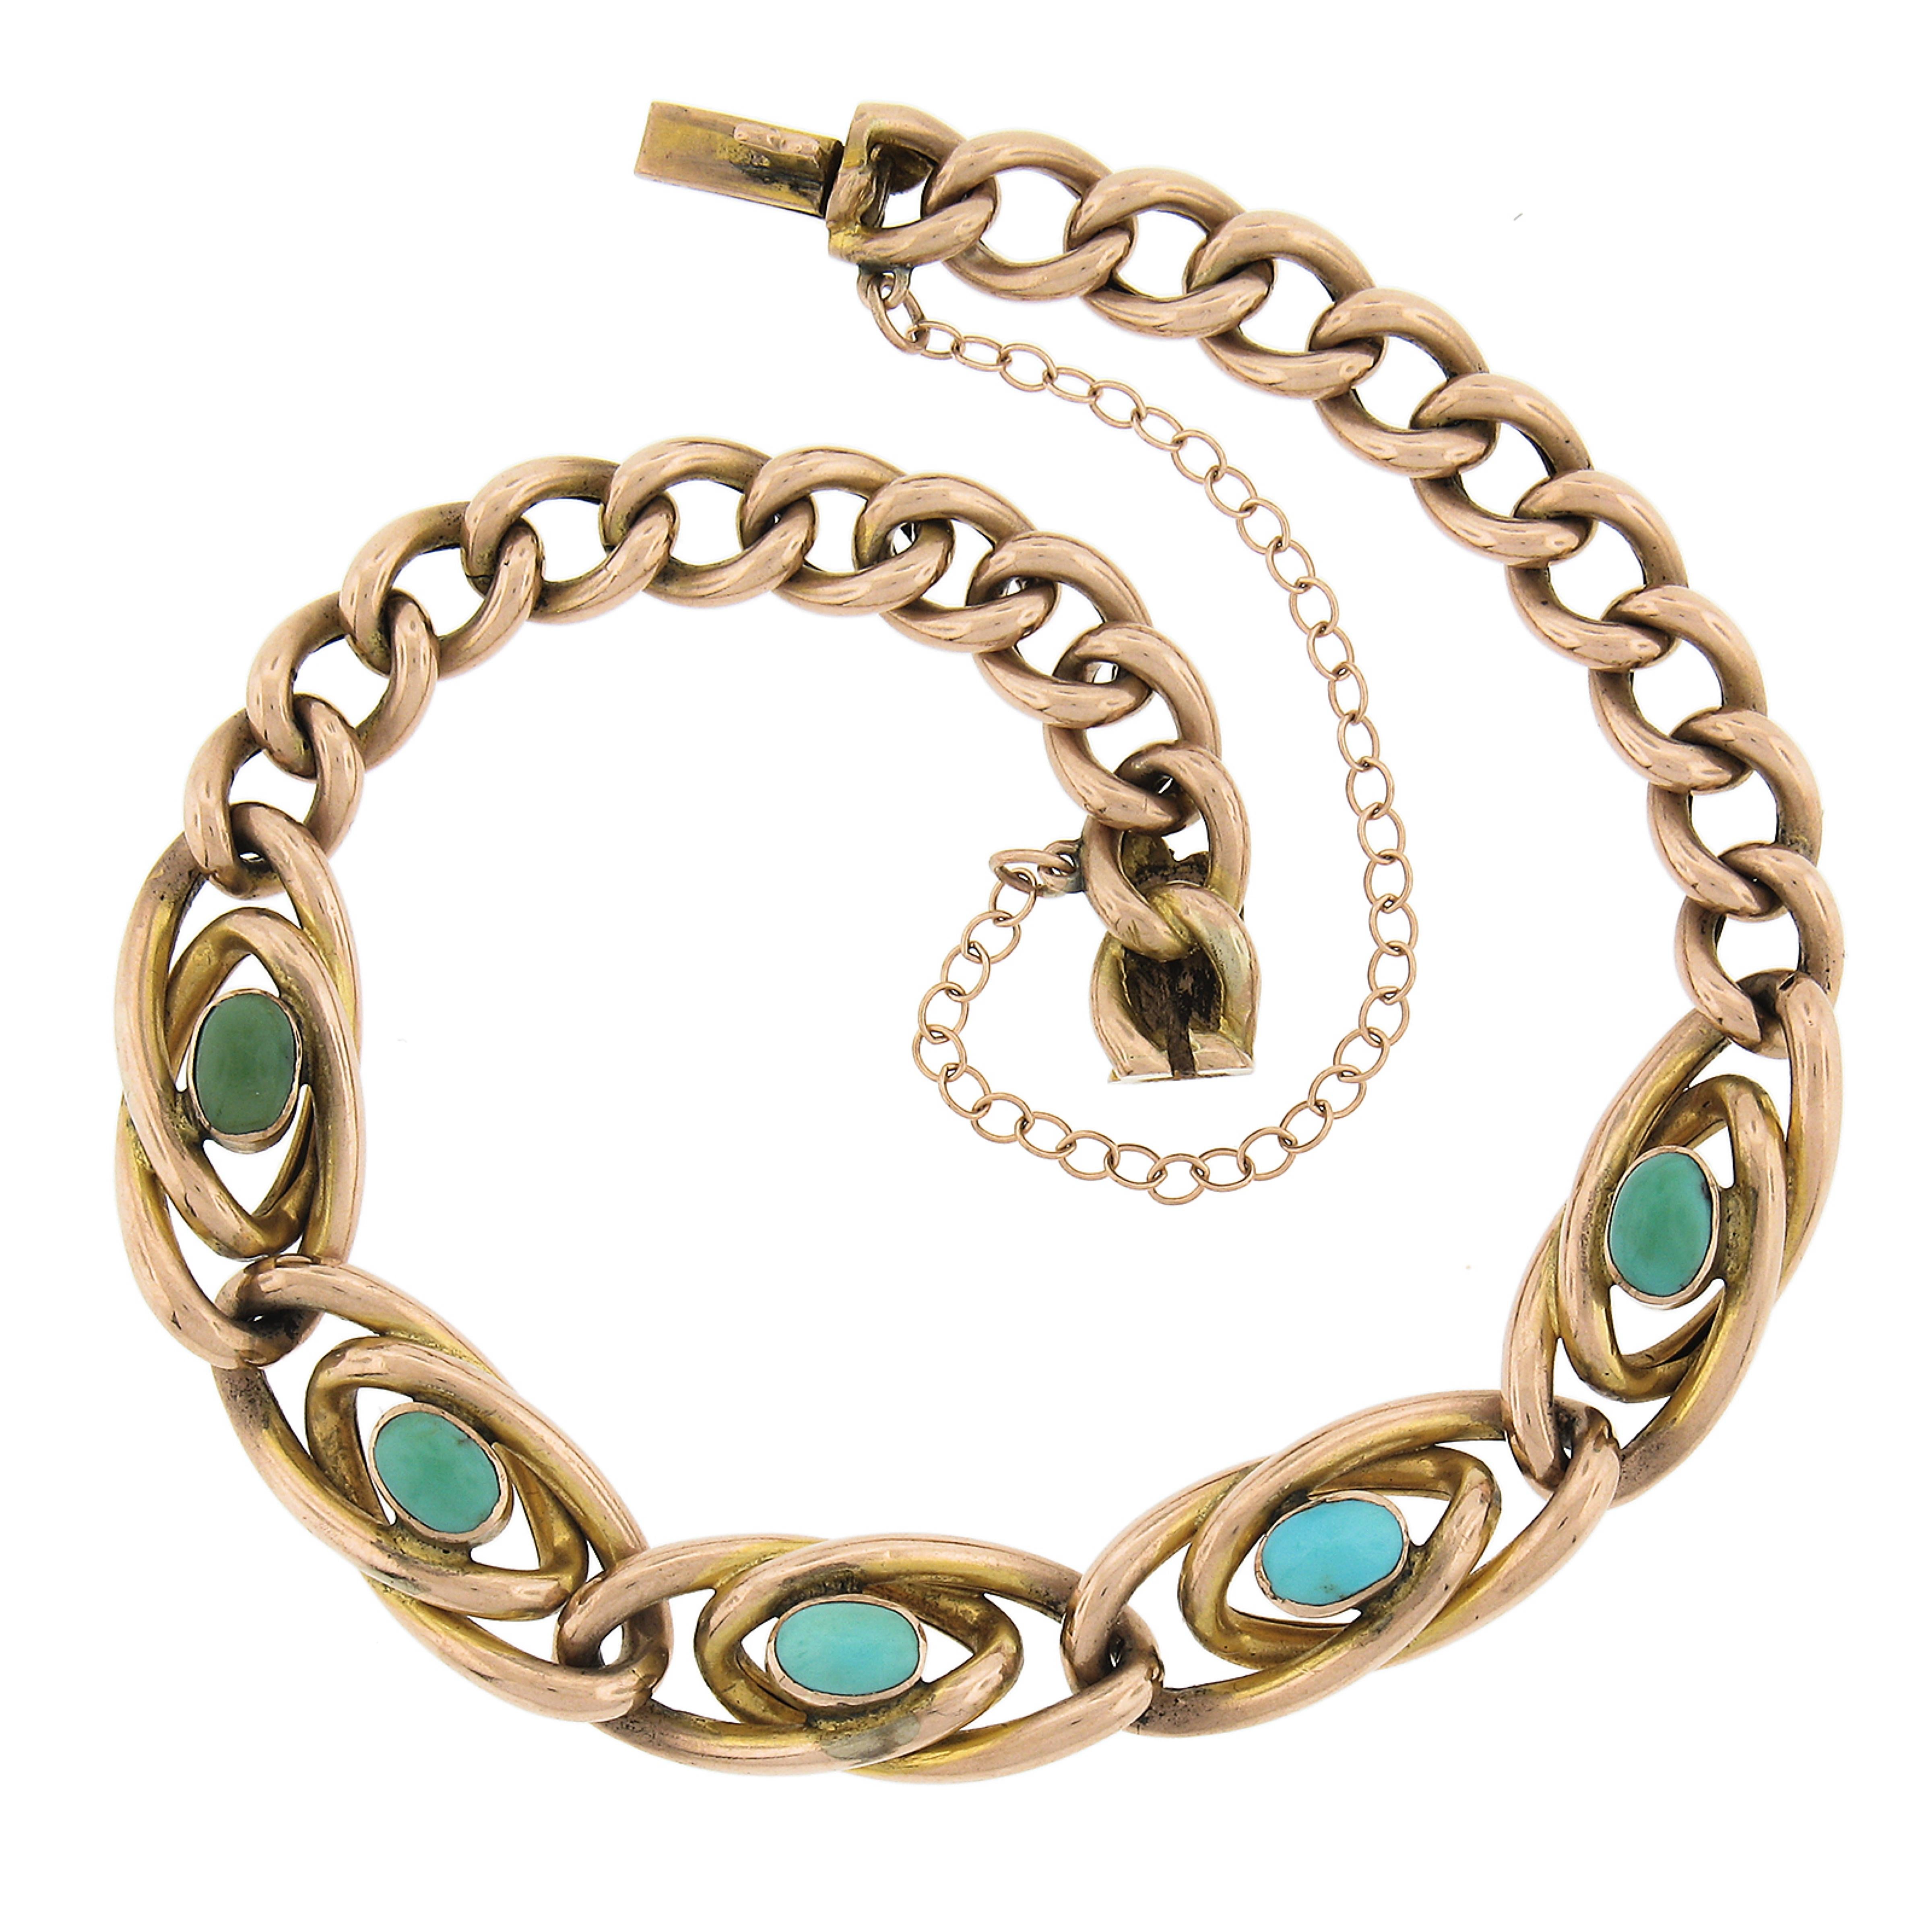 Antique Victorian 9k Rosy Gold Cabochon Turquoise Interlocking Curb Bracelet In Excellent Condition For Sale In Montclair, NJ